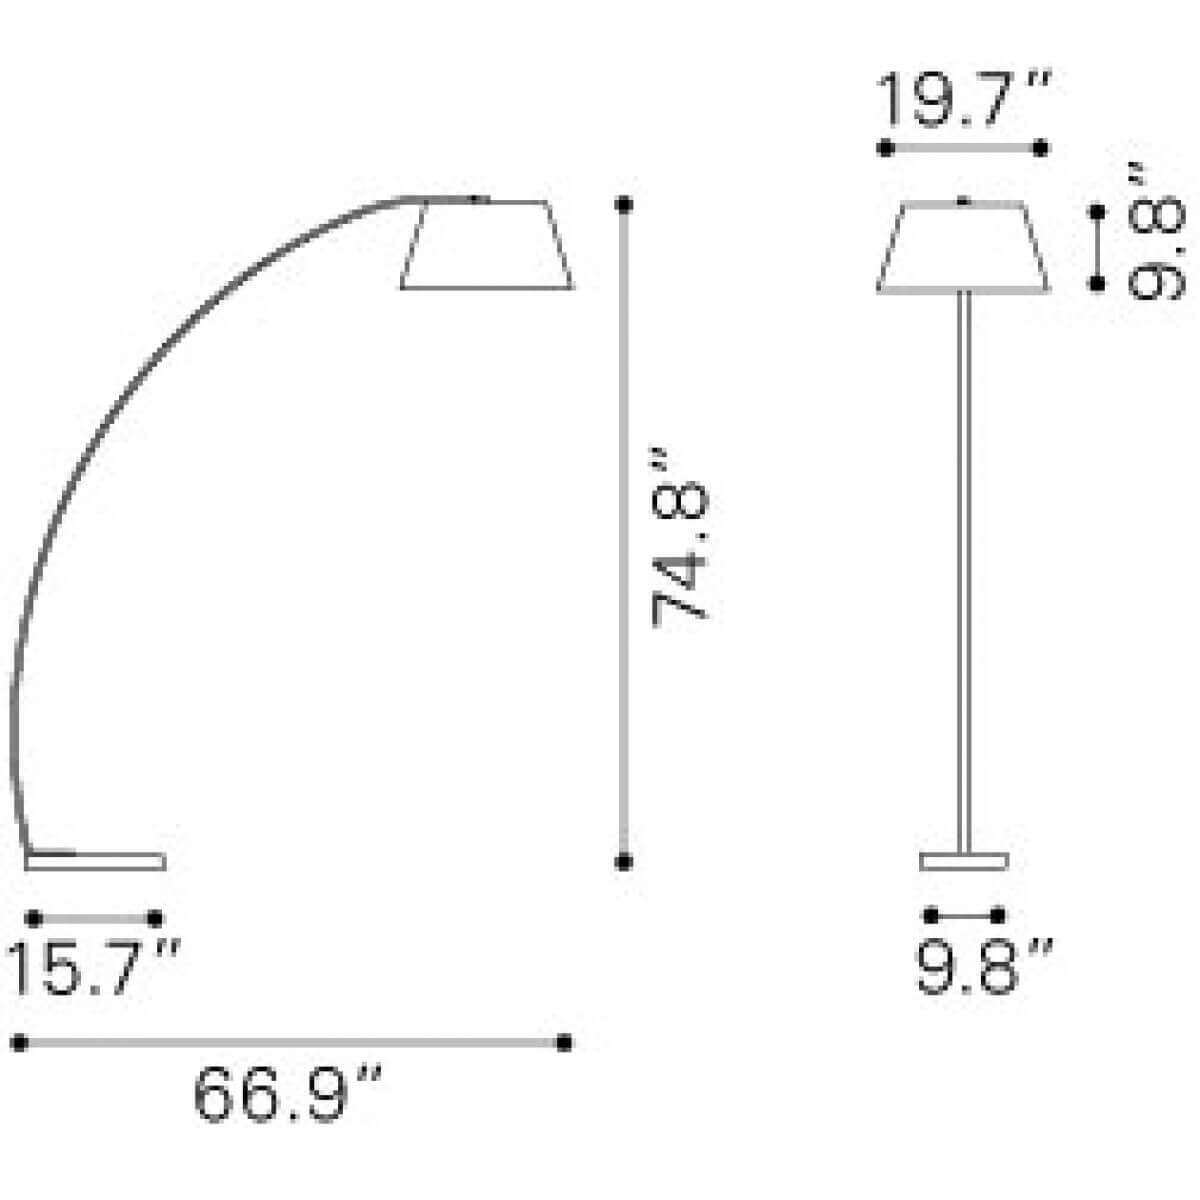 White floor lamp dimensions view